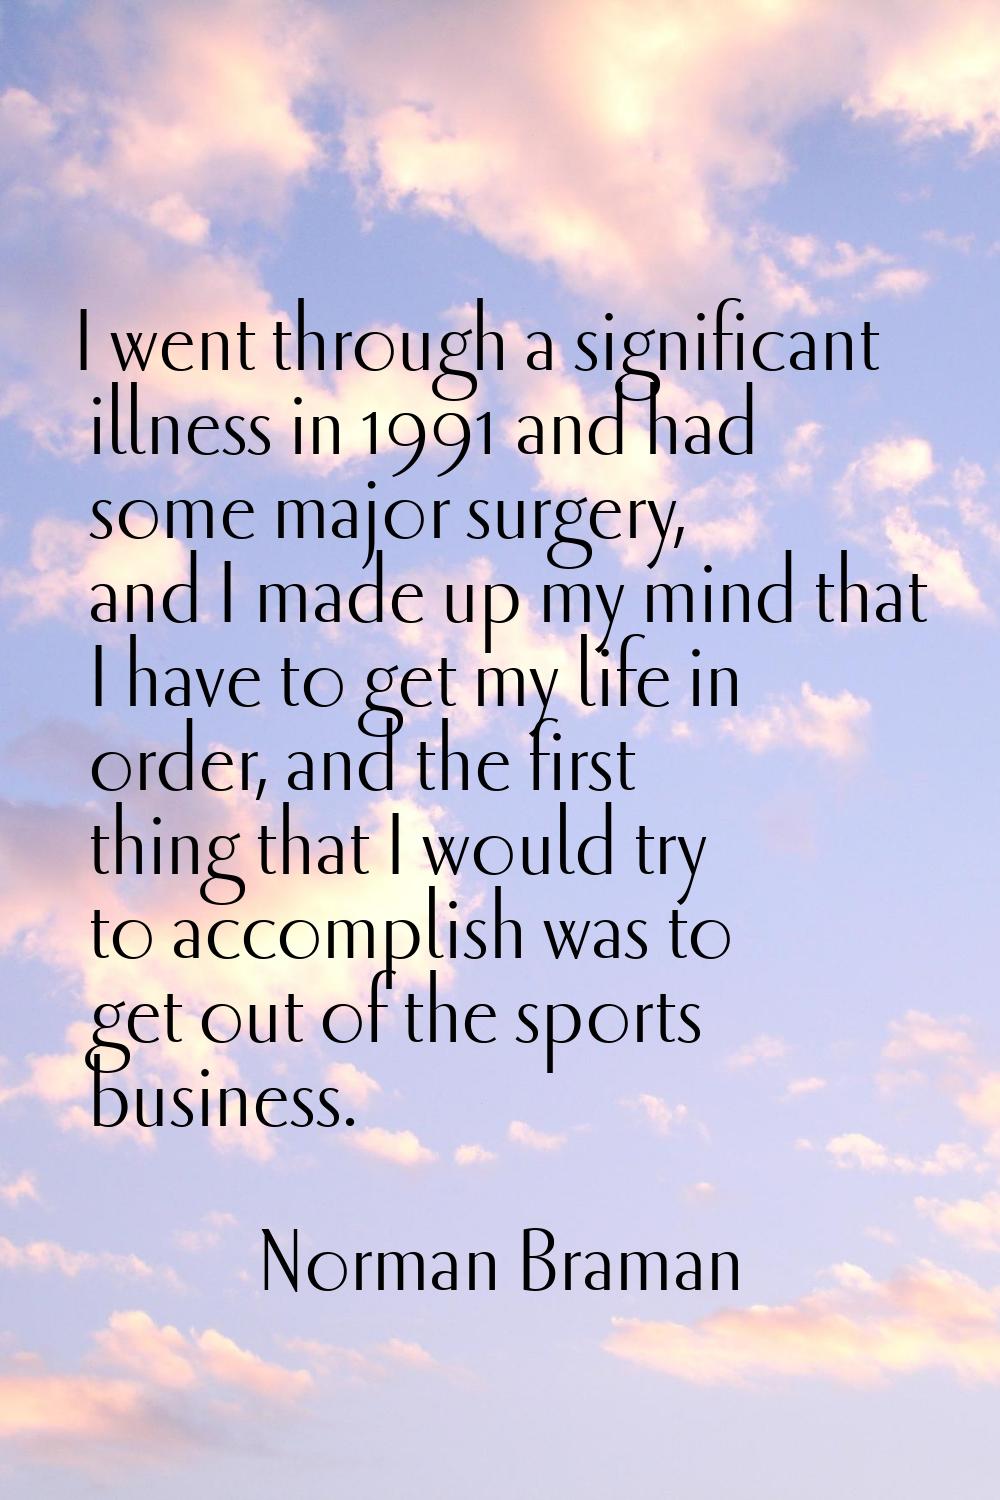 I went through a significant illness in 1991 and had some major surgery, and I made up my mind that